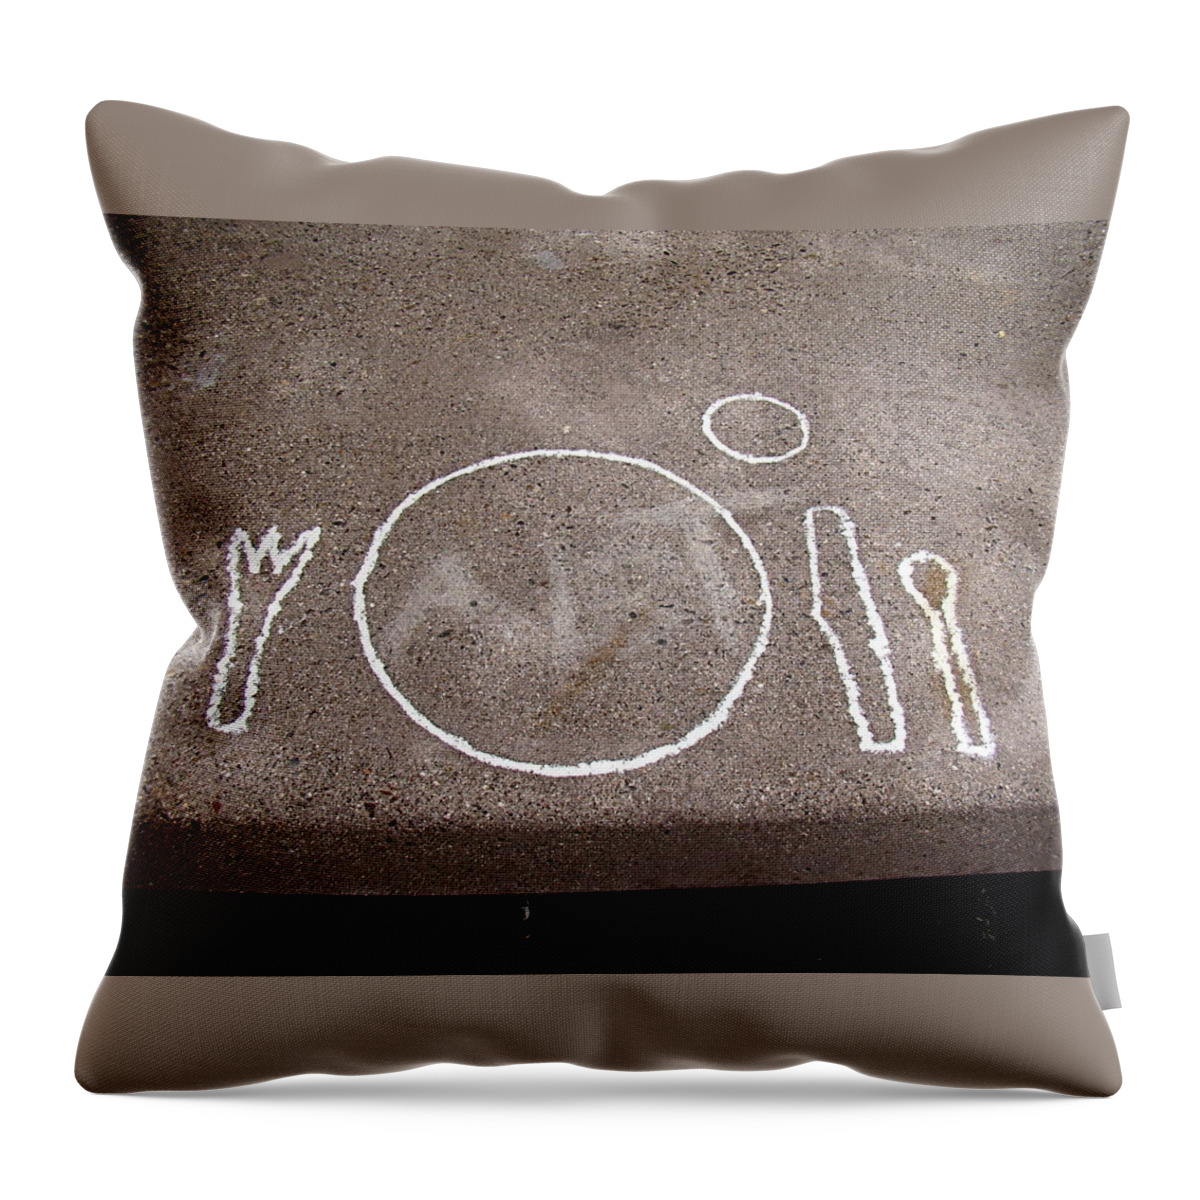 Creative Art Throw Pillow featuring the photograph Homeless Place Setting by Nick Kloepping